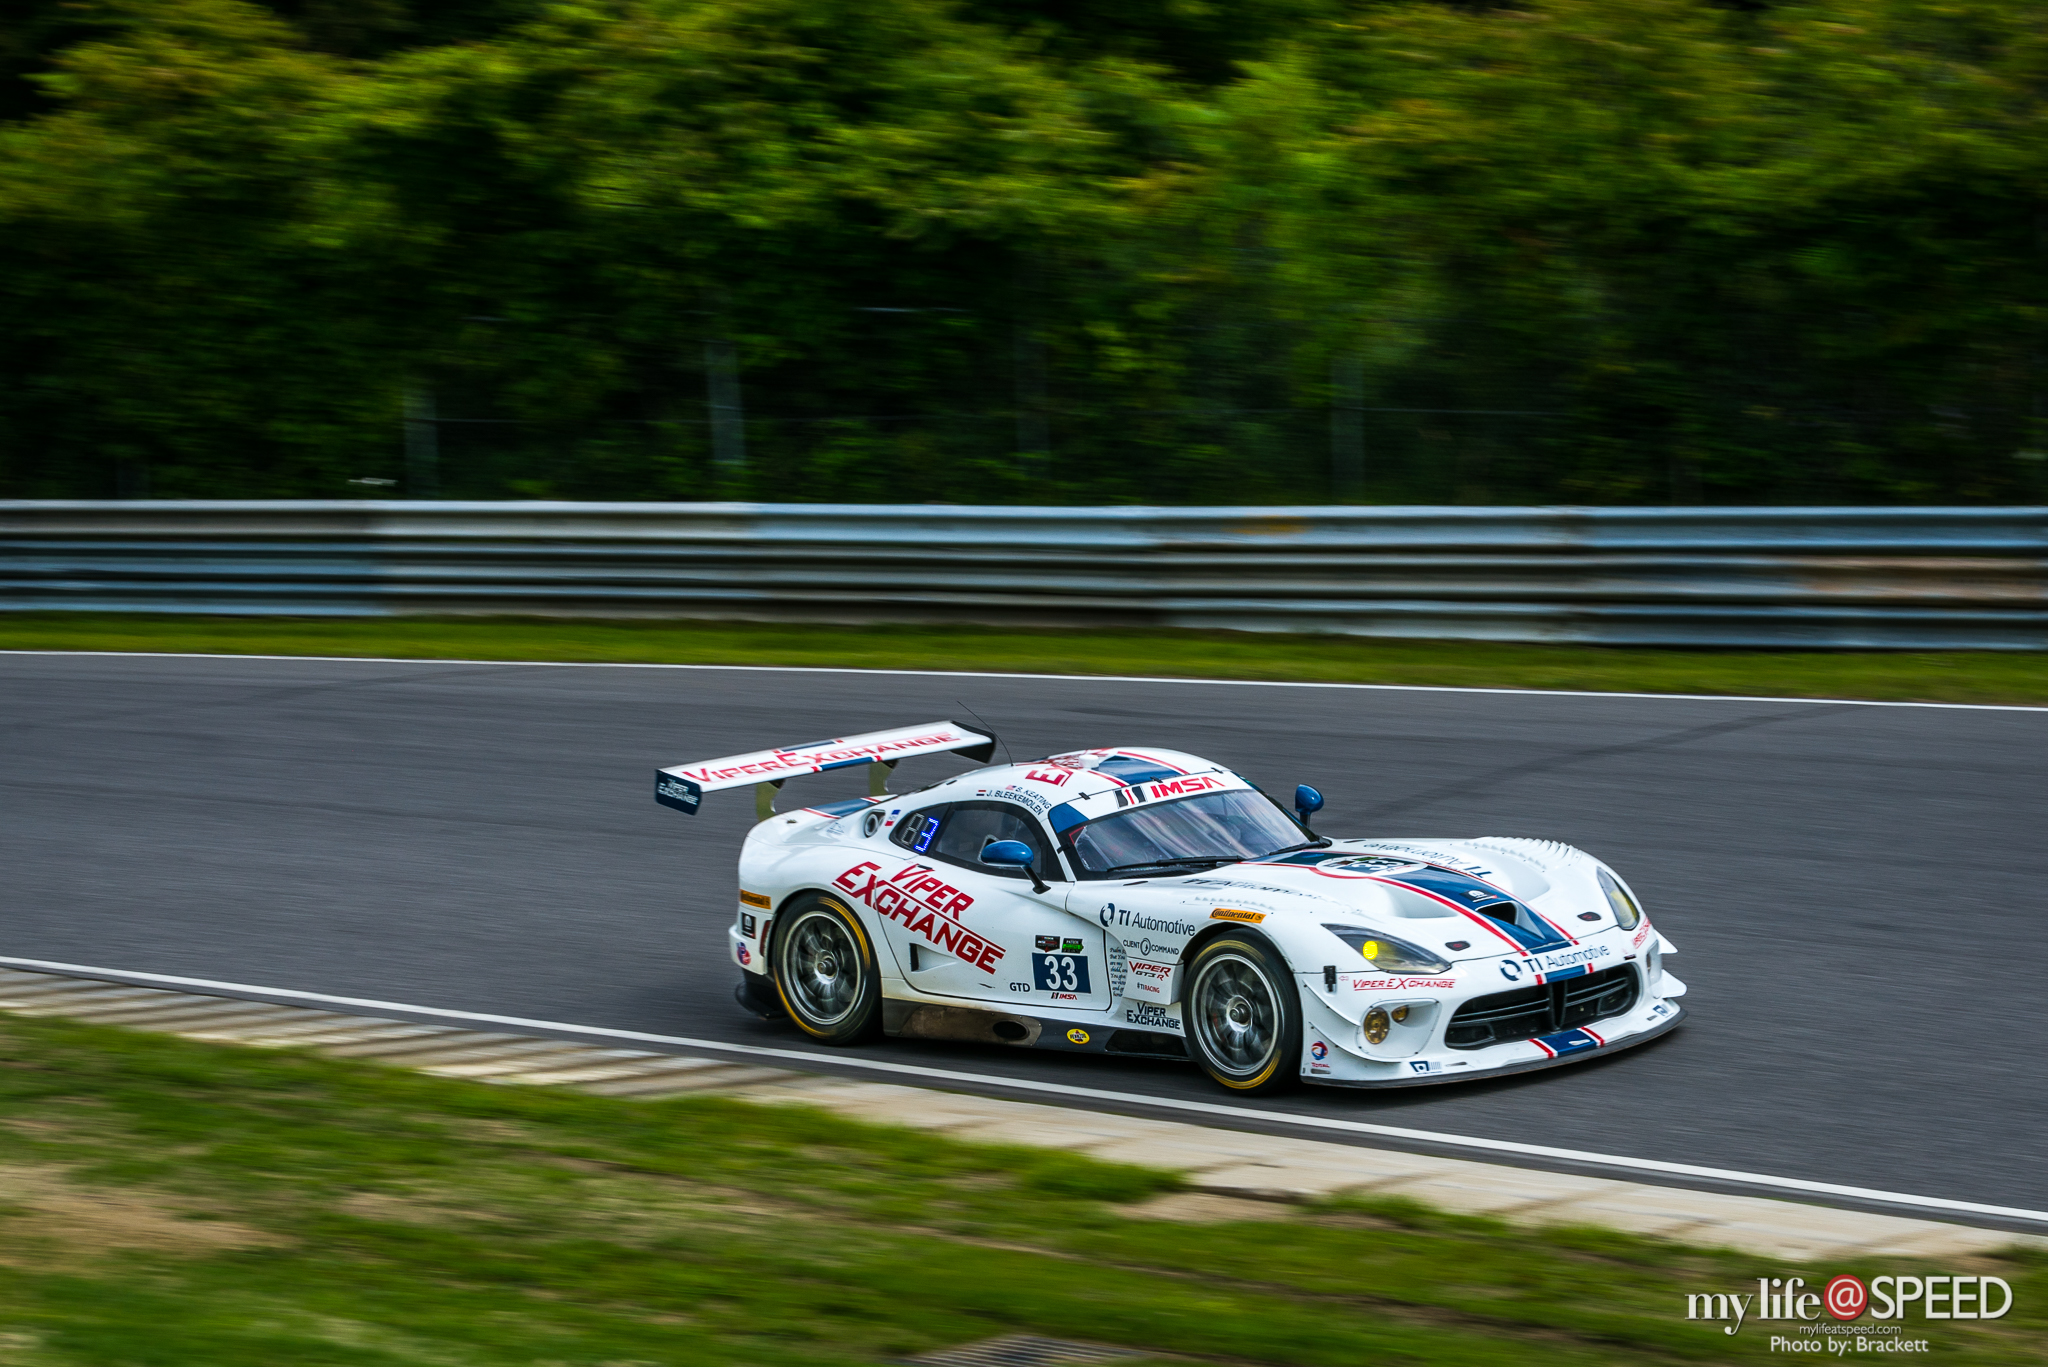 Viper Exchange and their Viper SRT GT3-R